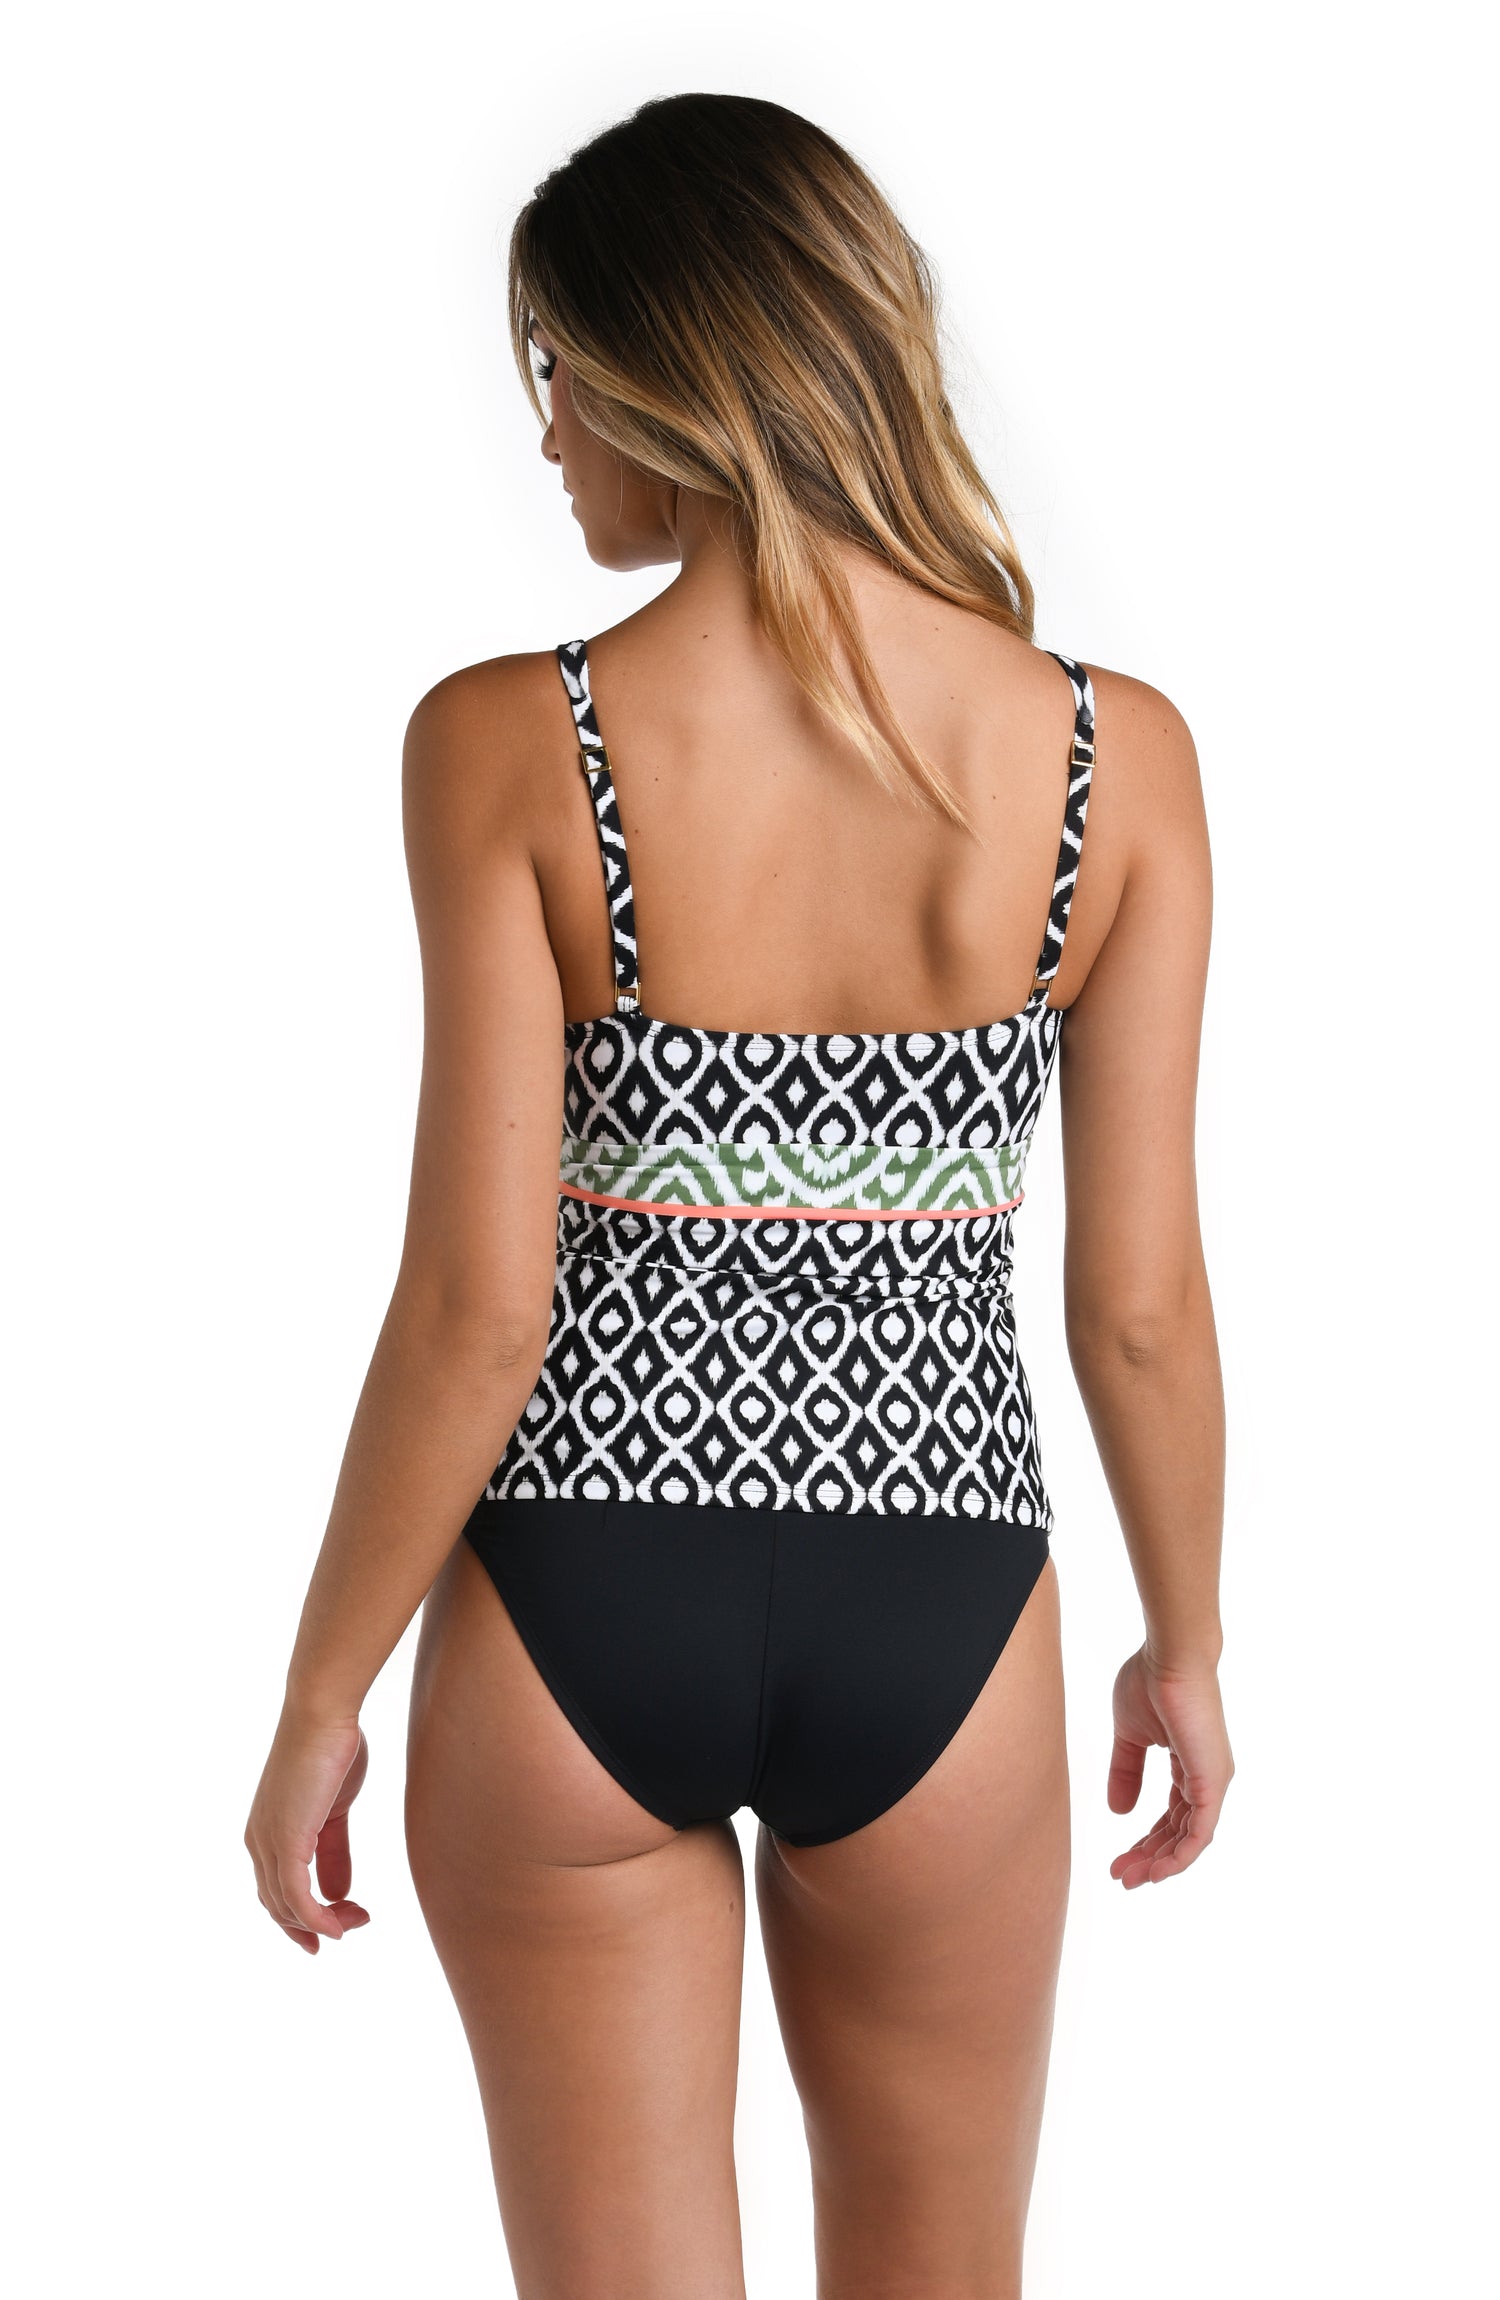 Model is wearing a multicolored Over The Shoulder Tankini Swimsuit Top